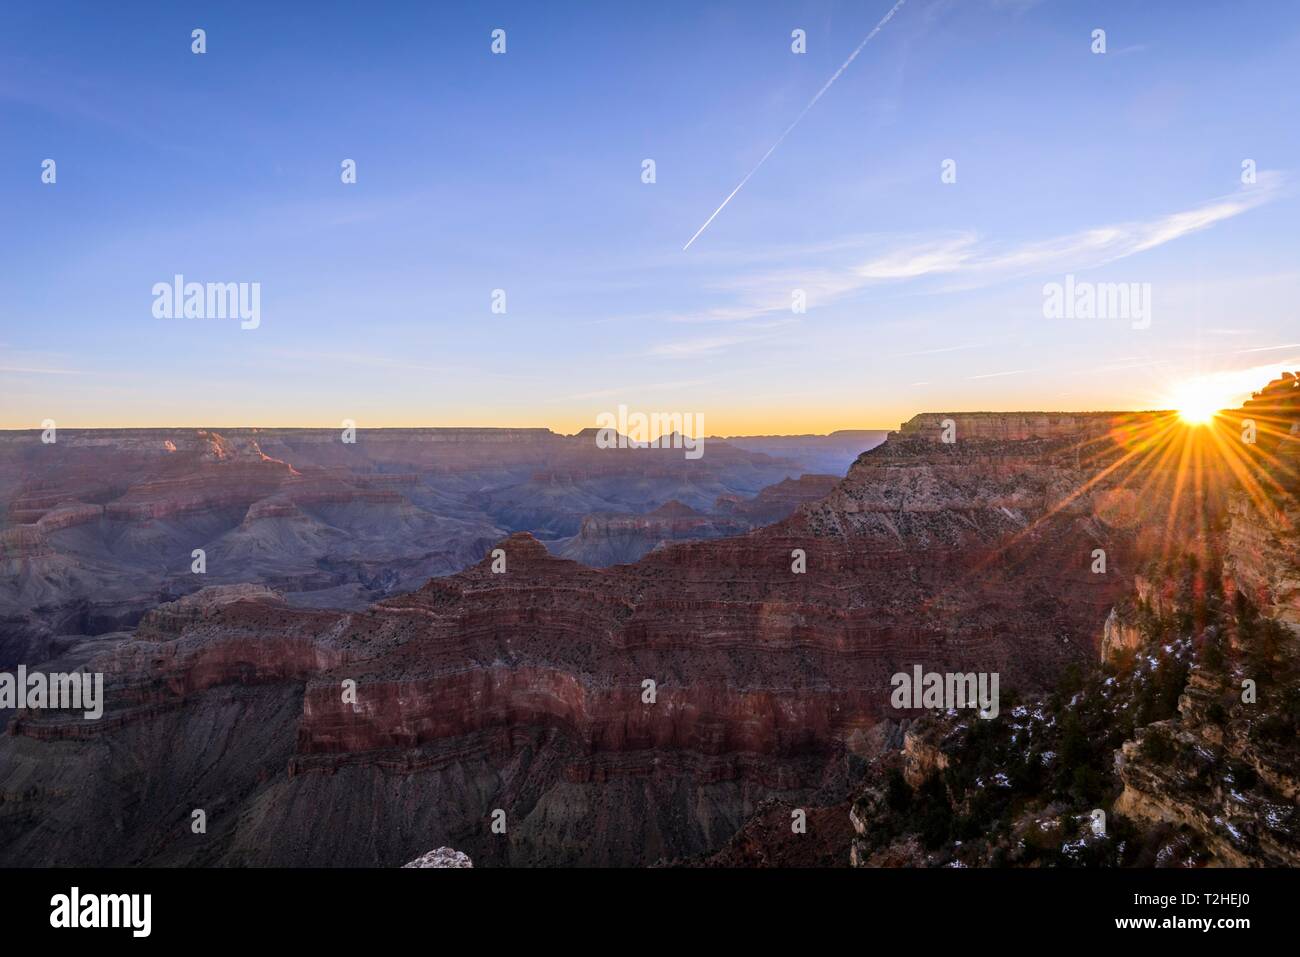 Gorge of the Grand Canyon at sunrise, Sun Star, View from Rim Walk, eroded rock landscape, South Rim, Grand Canyon National Park, Arizona, USA Stock Photo